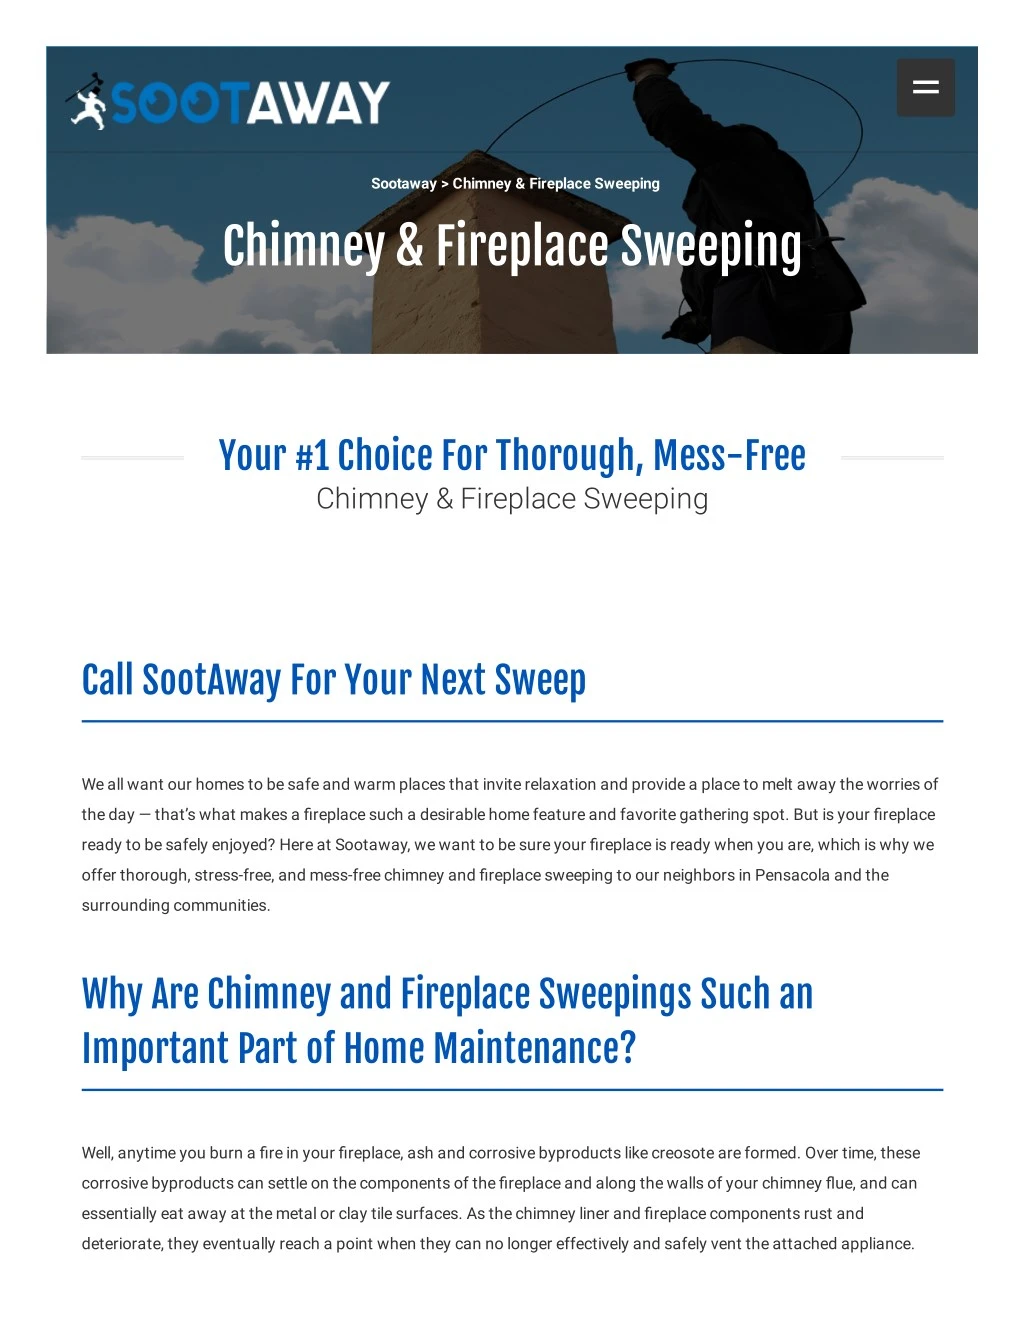 sootaway chimney fireplace sweeping